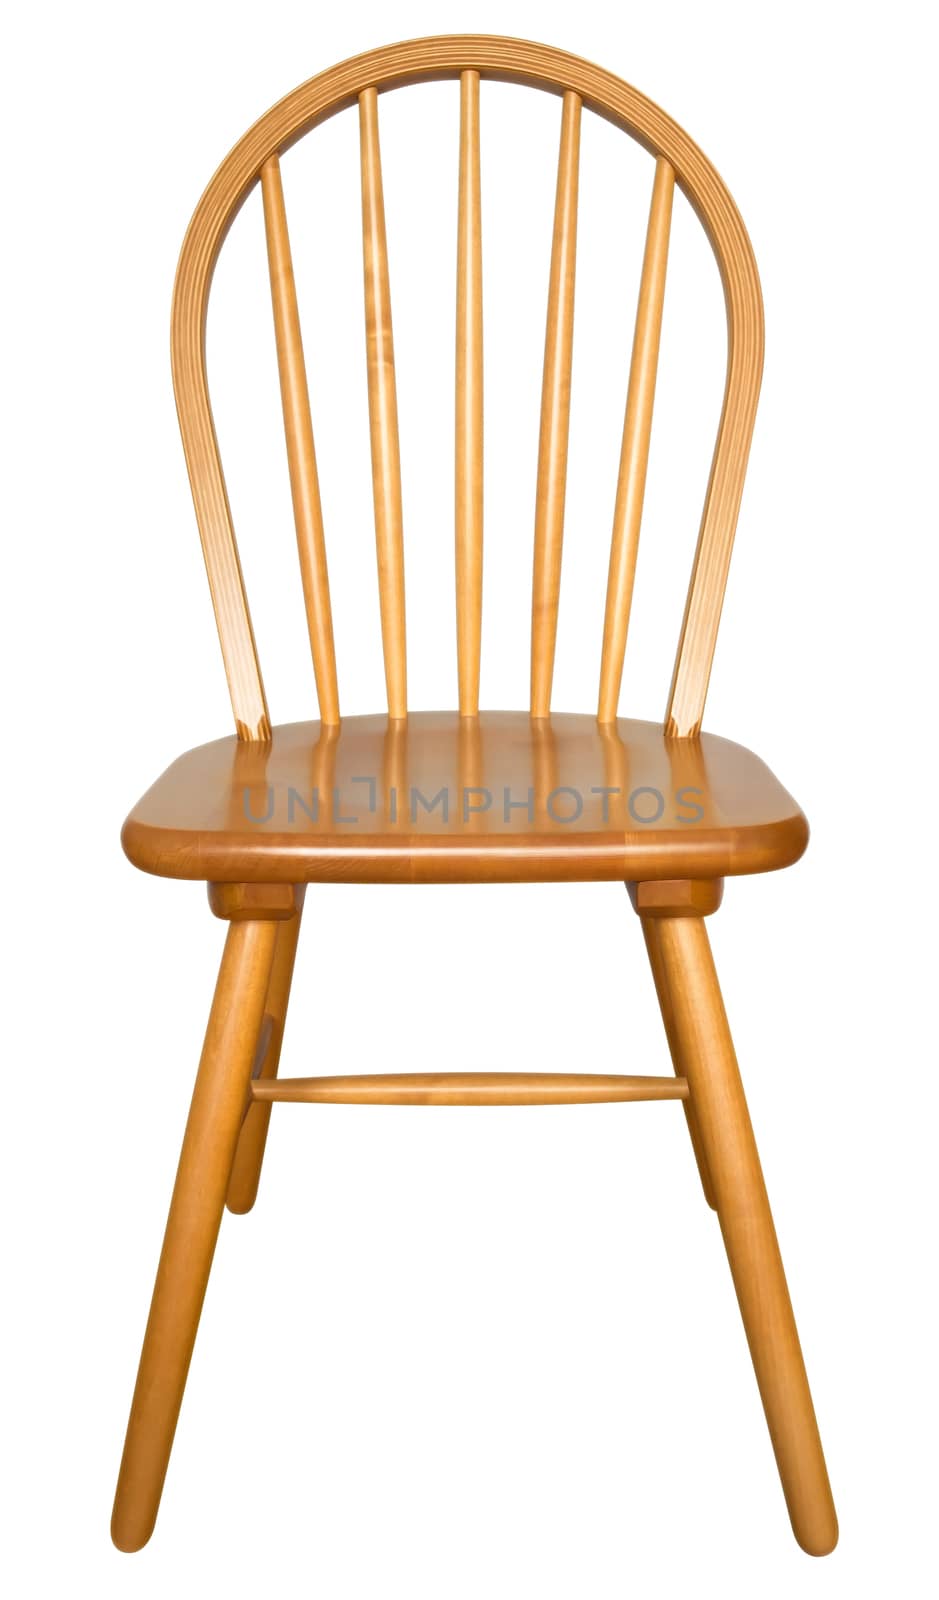 Wooden chair isolated on the white background. Clipping path included.